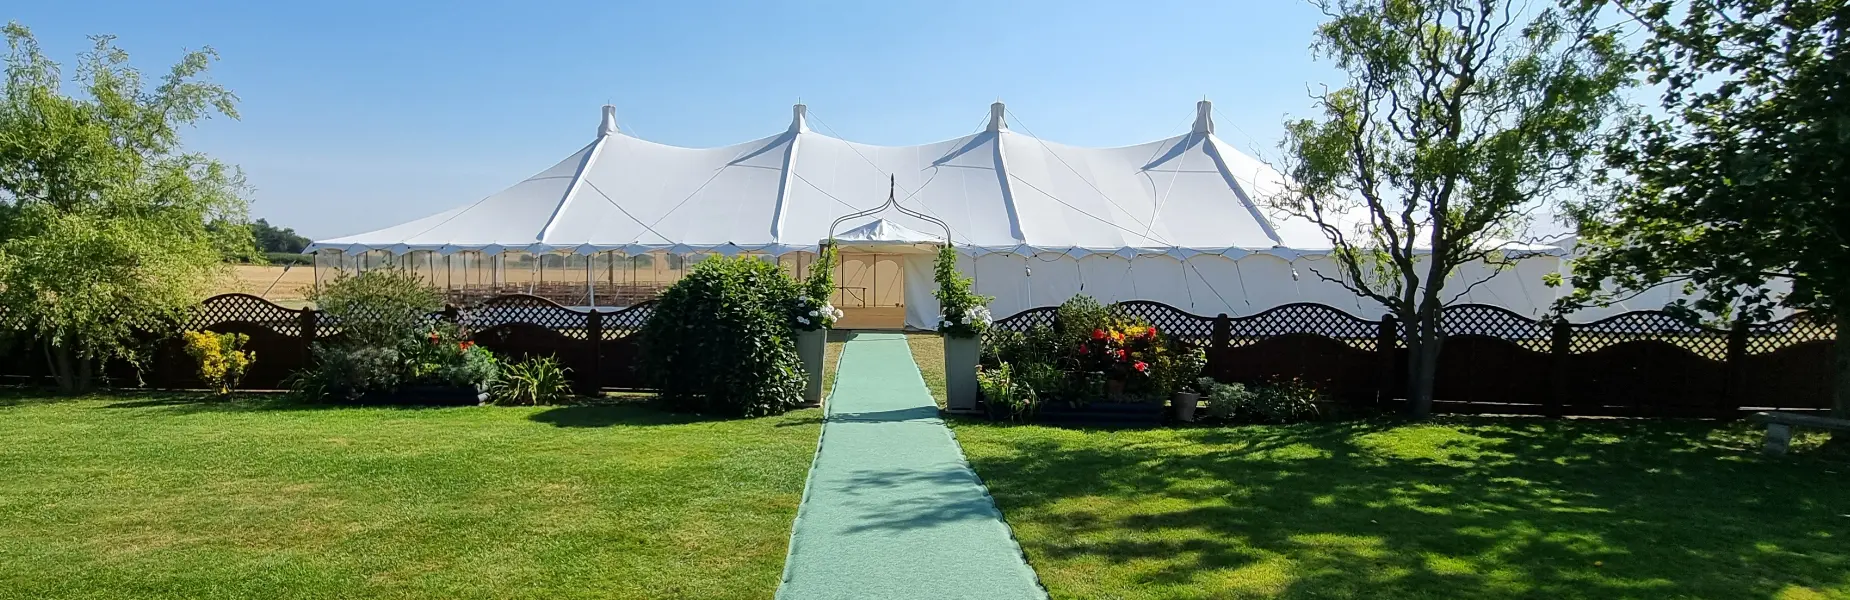  | Fairytale Marquees | Marquees for Hire in Bedfordshire, Hertfordshire, Cambridgeshire and Buckinghamshire